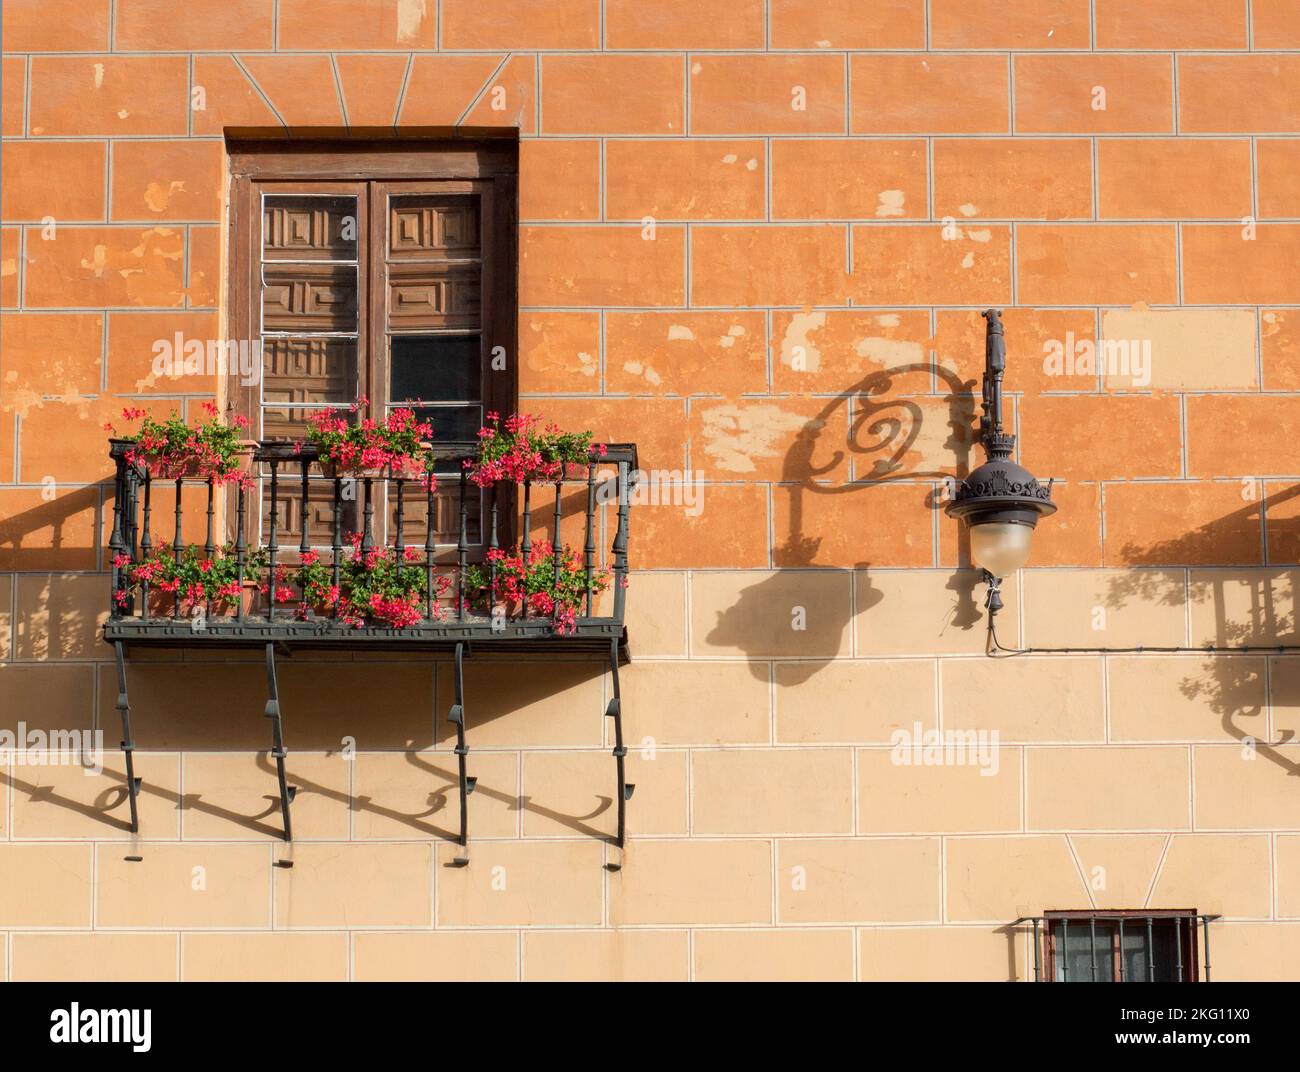 Calle Ancha balconies. Historical building decorated with red flowers planters, Leon, Spain Stock Photo